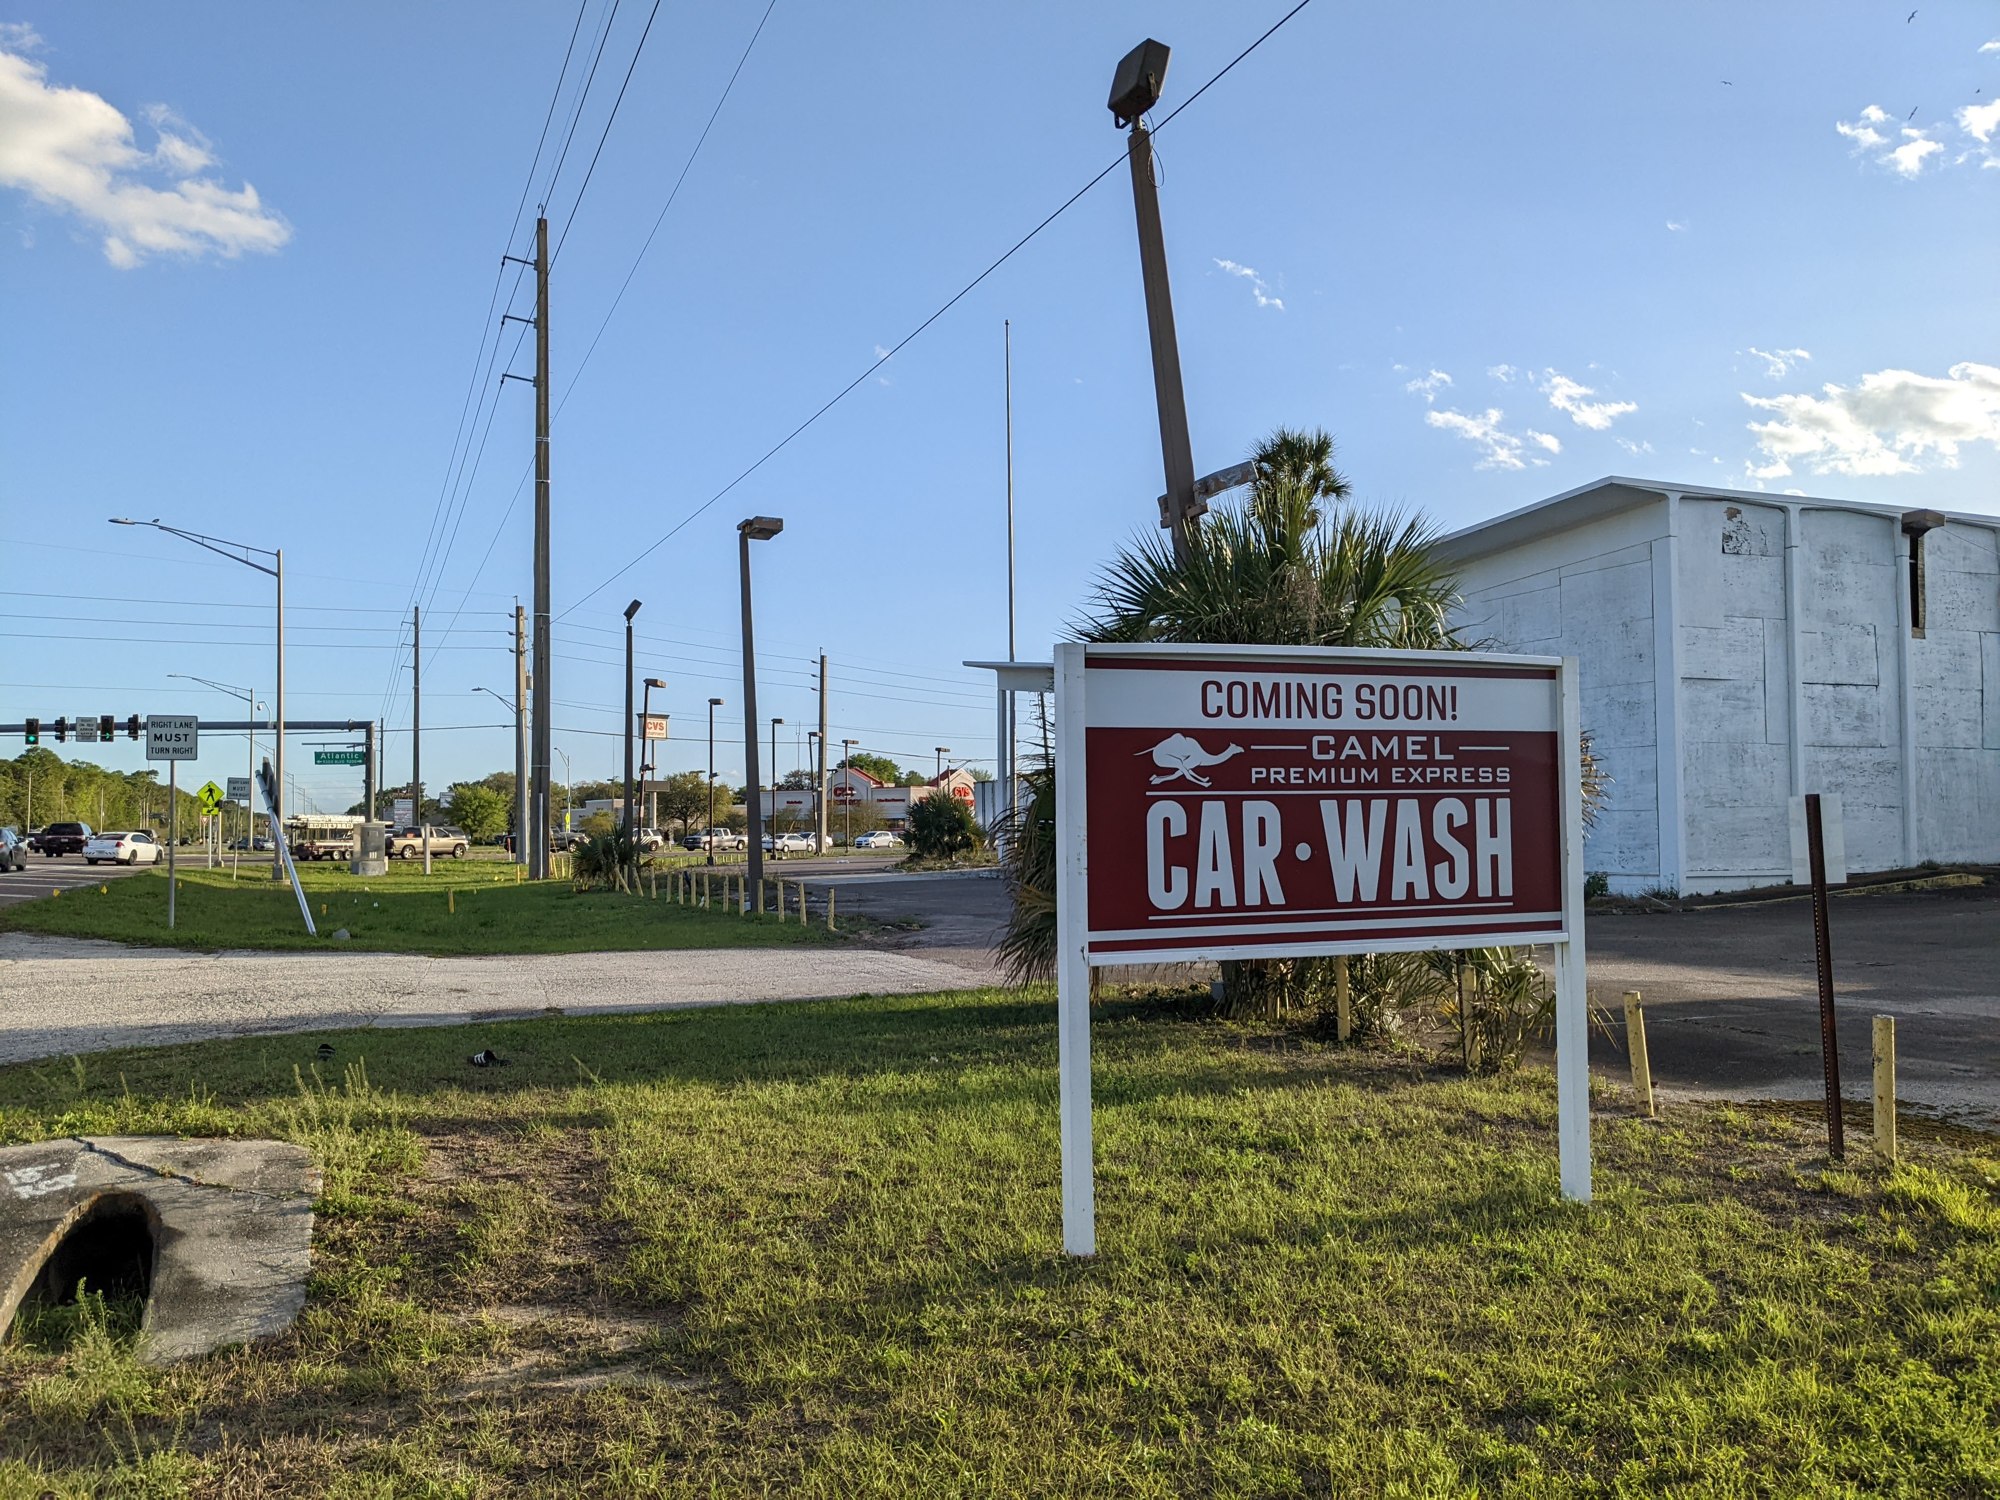 Camel Premium Express Car Wash also plans to build on the site.